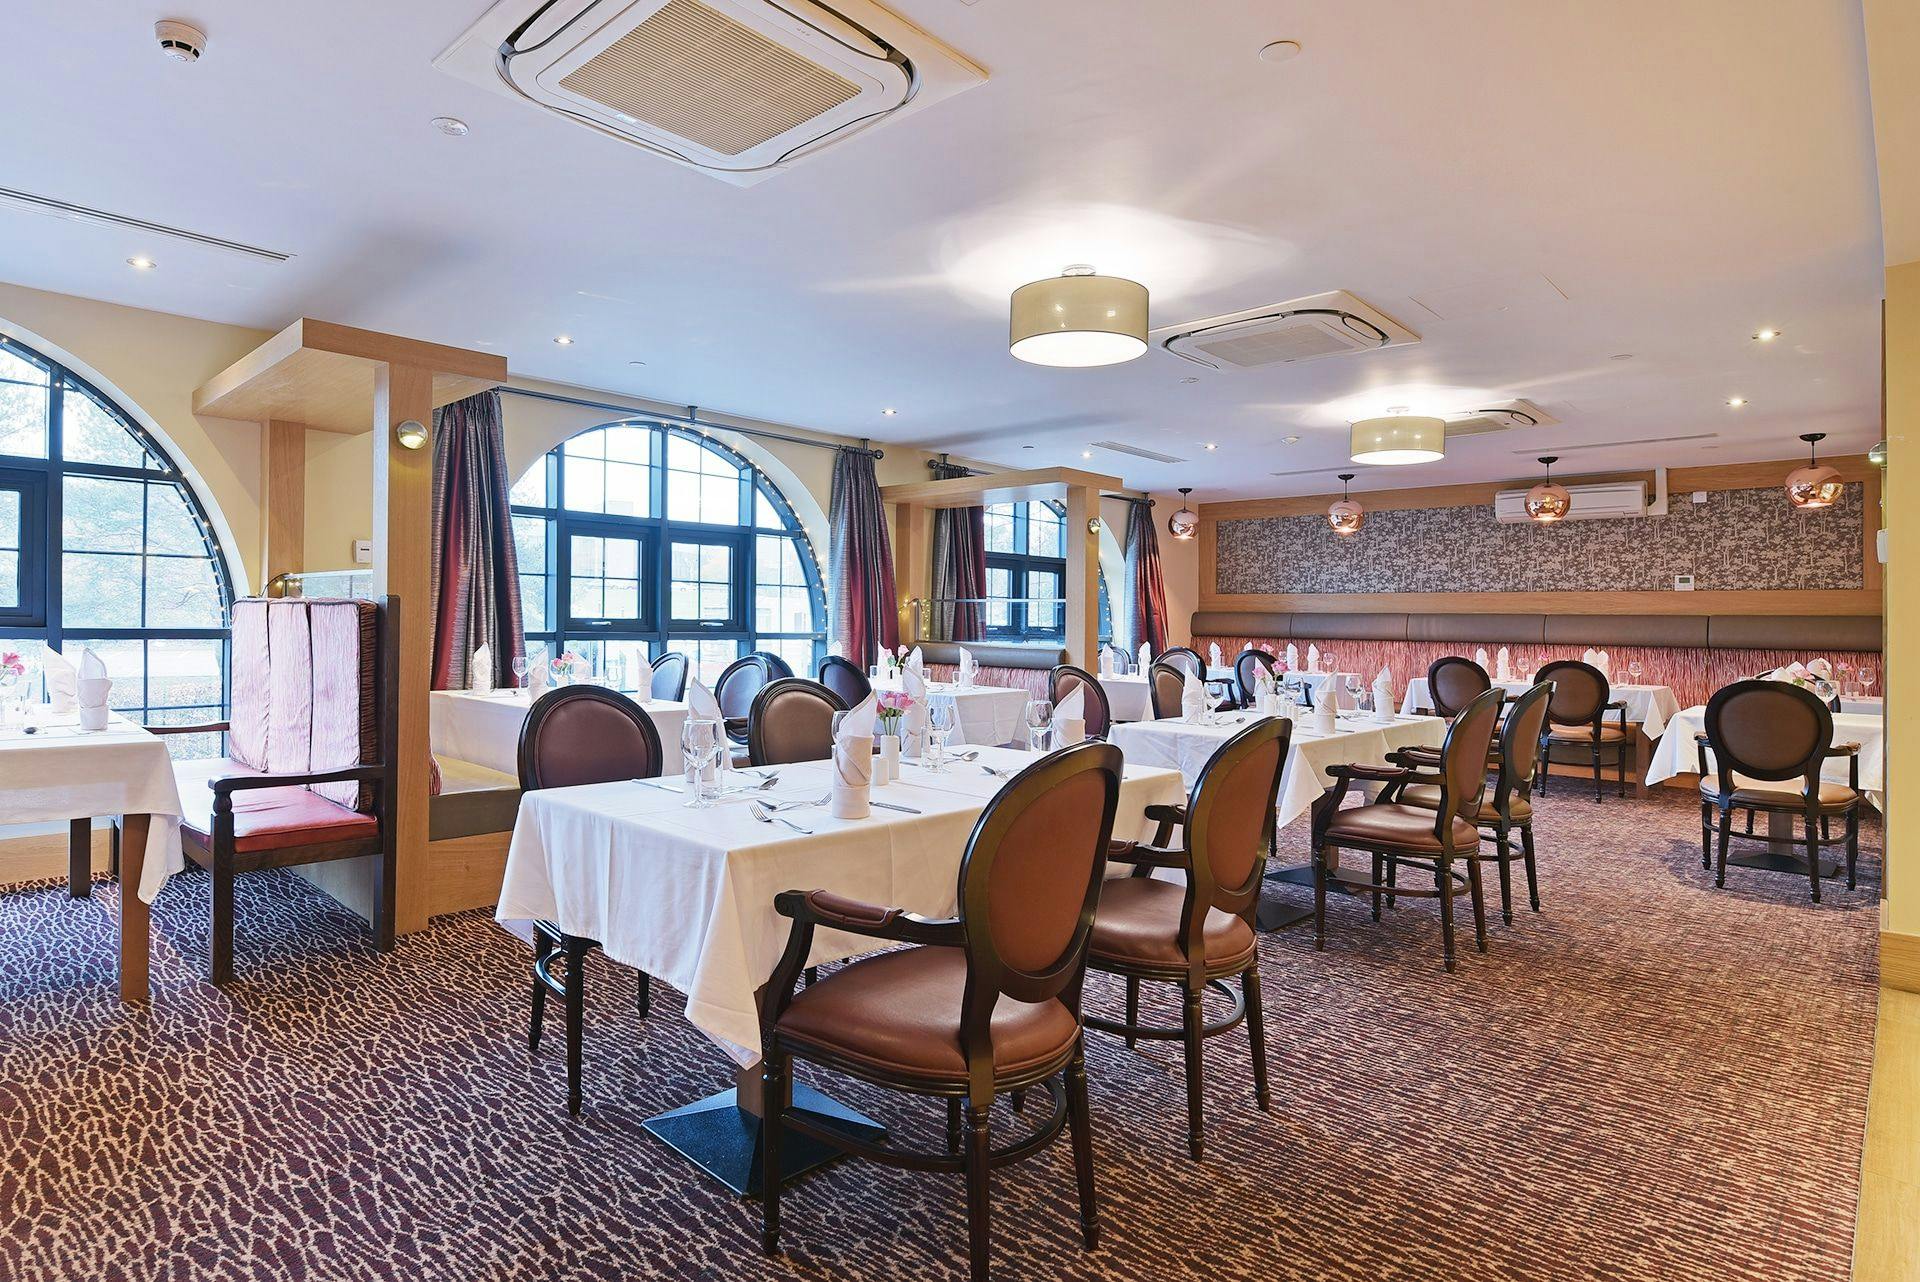 Dining room of Brentwood Arches care home in Brentwood, Essex